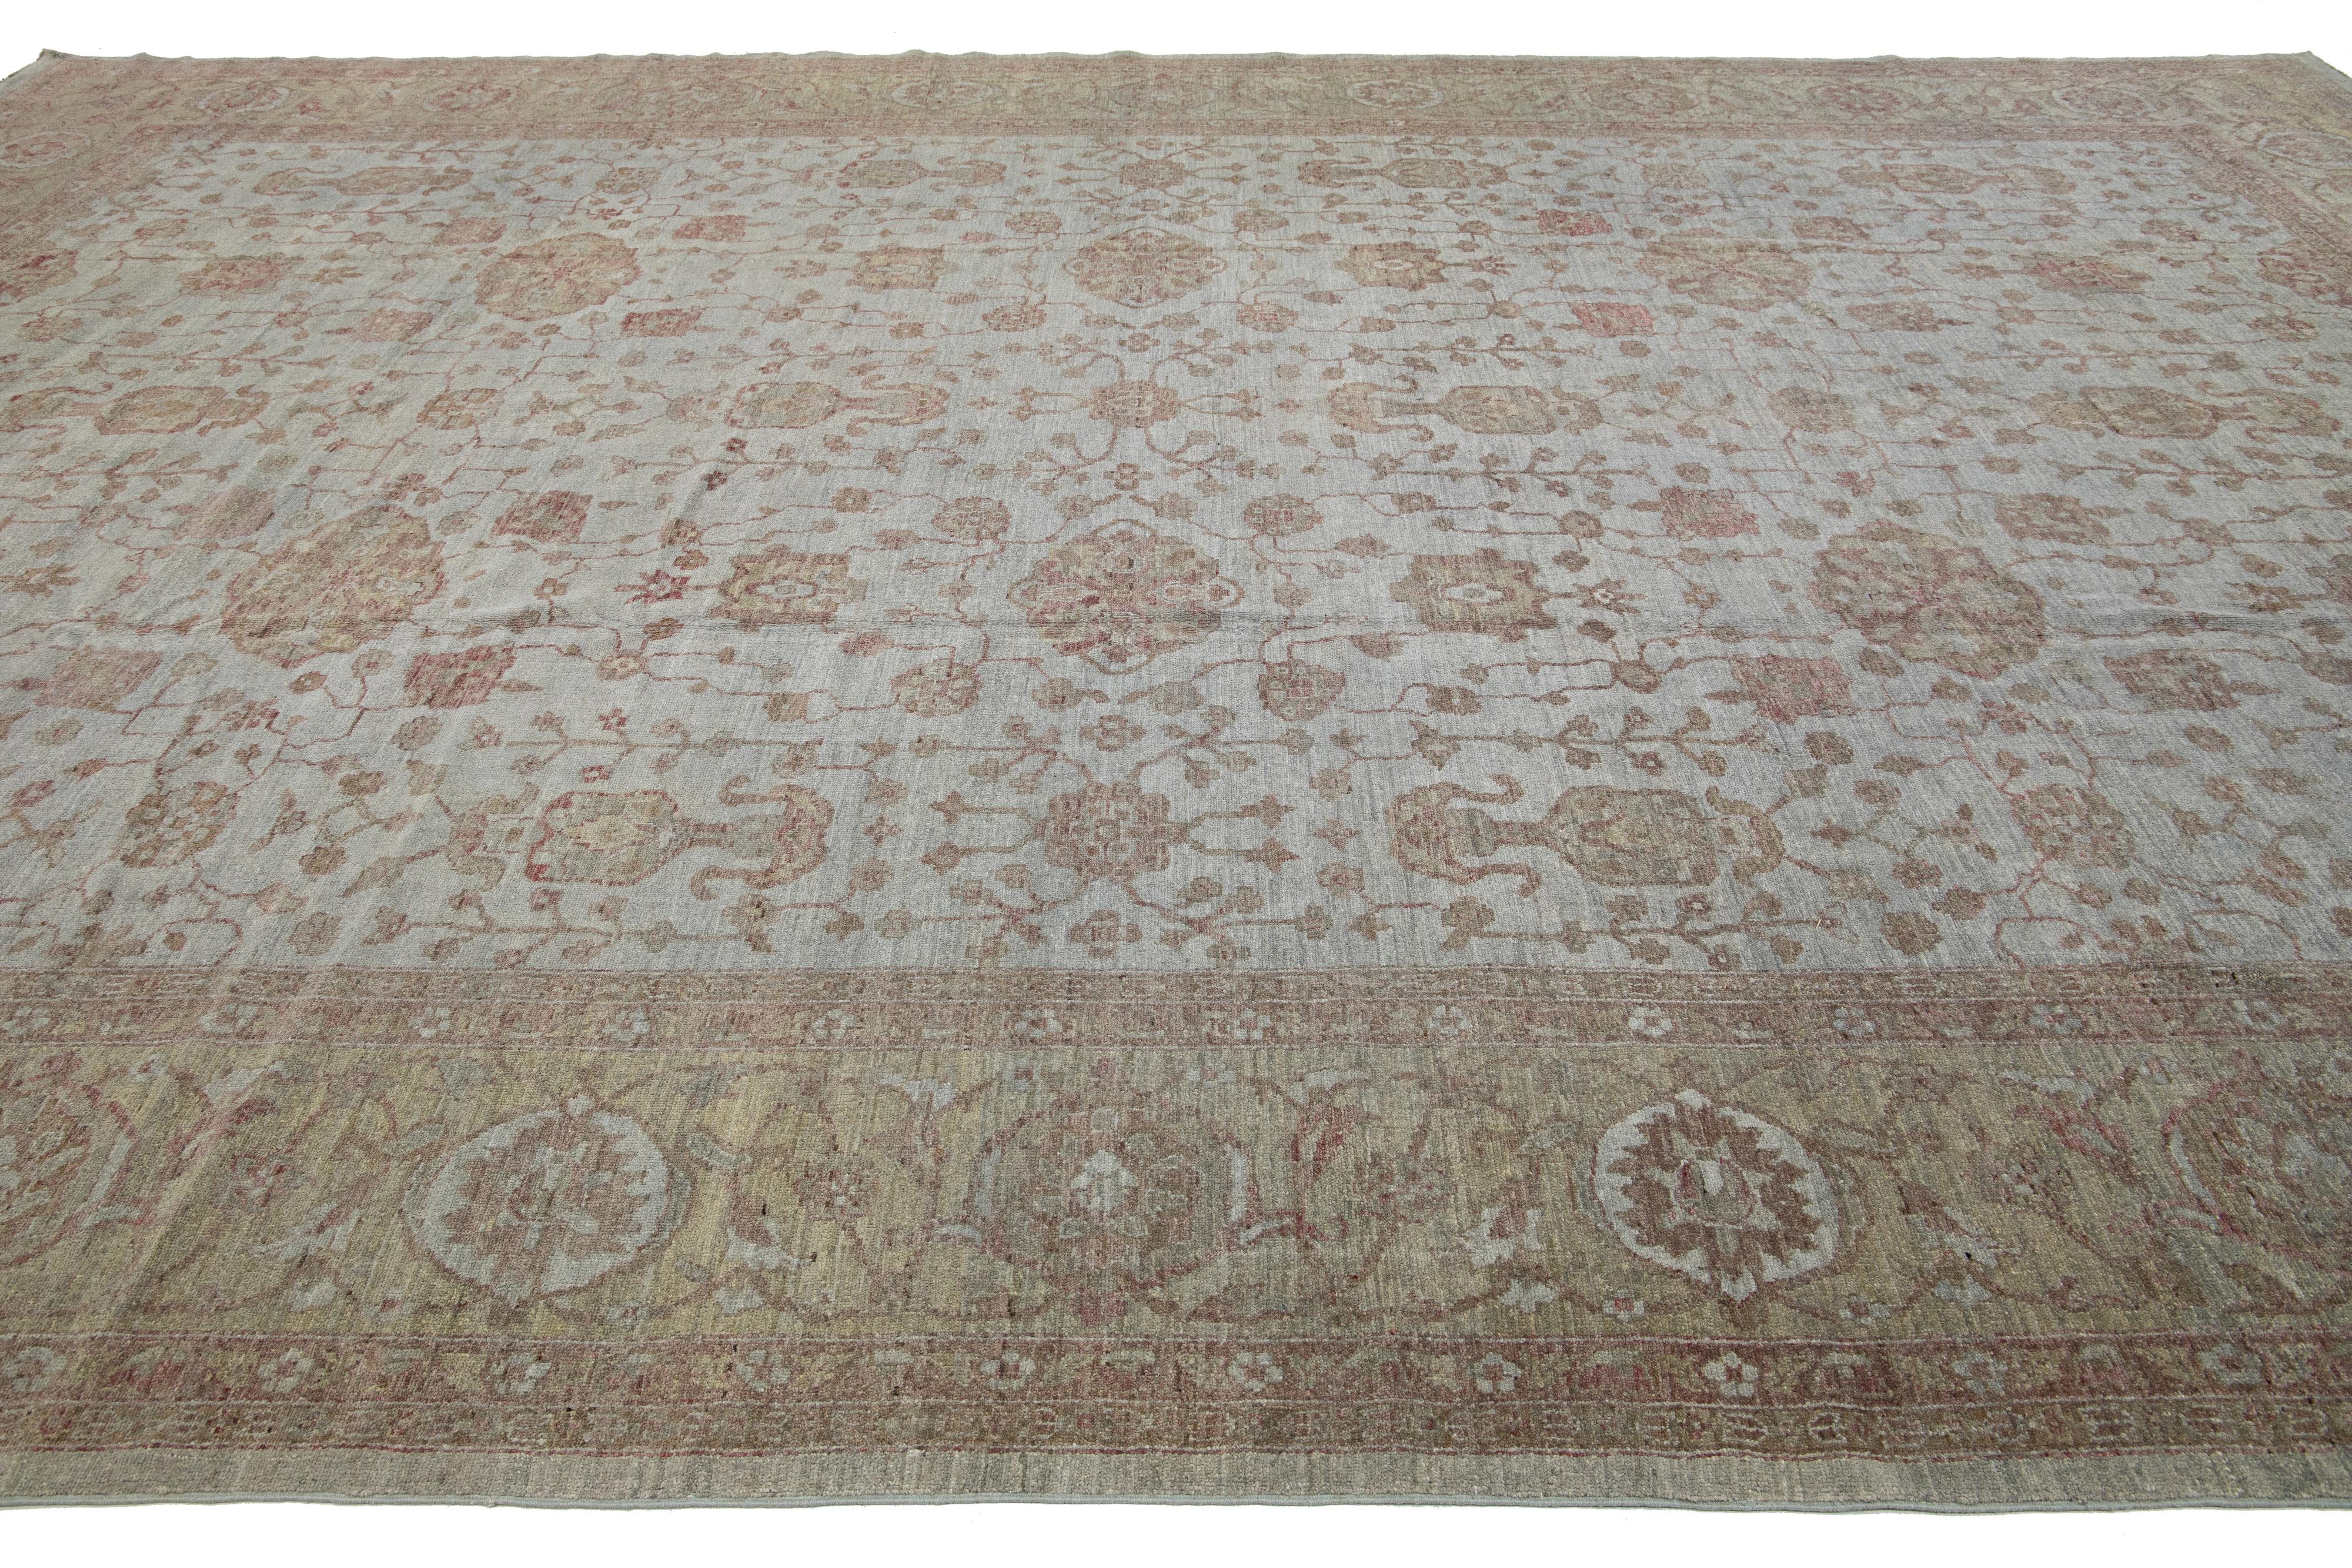 Oversized Modern Oushak Style Gray Wool Rug Features Allover Motif In New Condition For Sale In Norwalk, CT